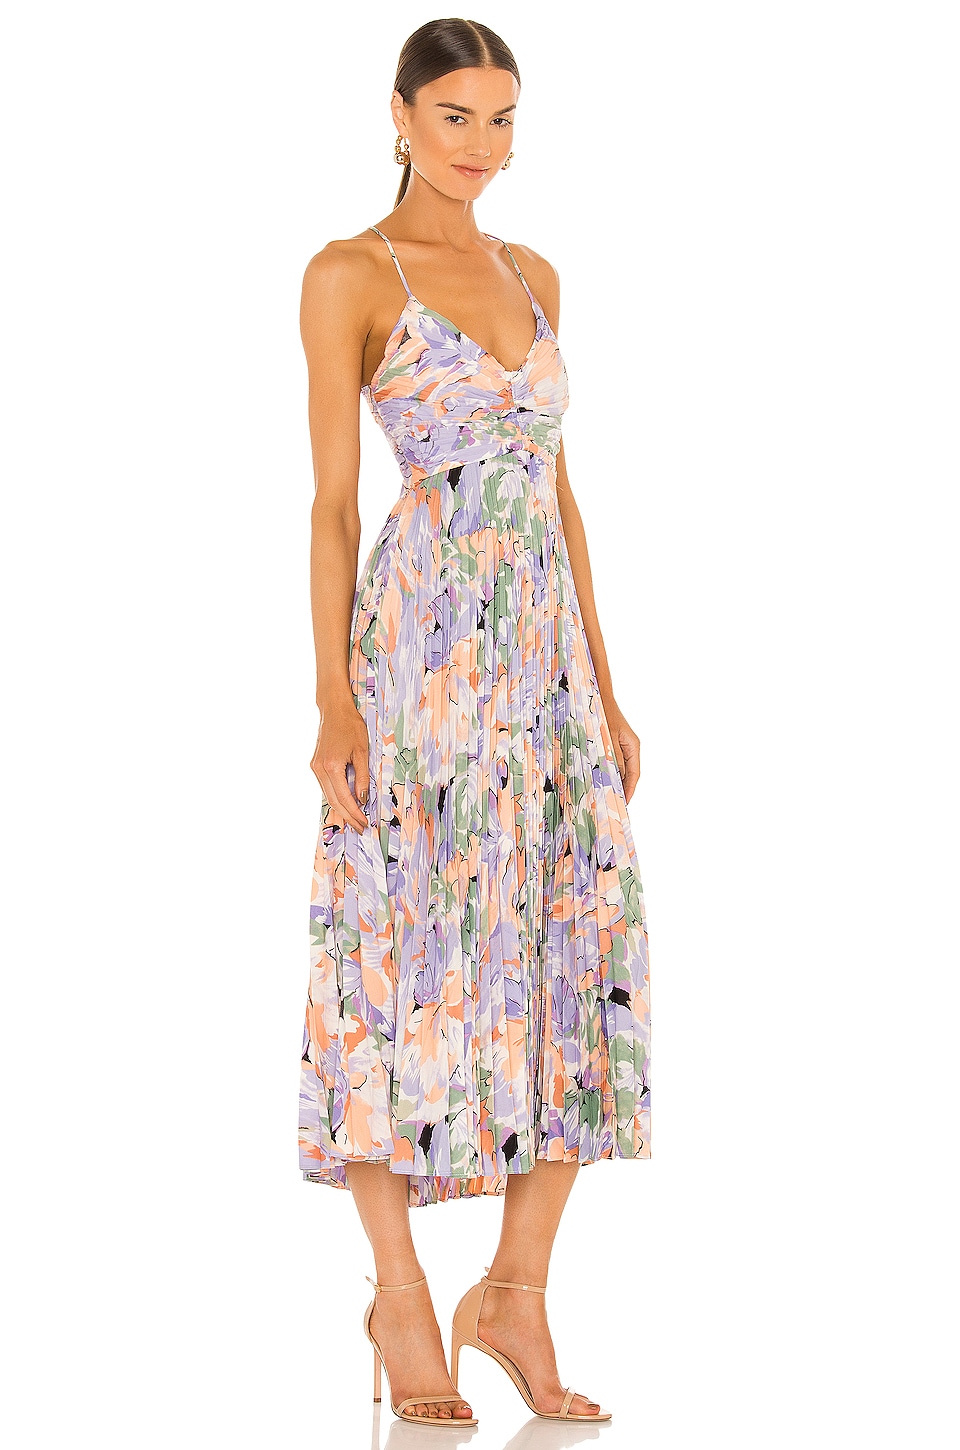 Chic floral midi dress with stiletto heels